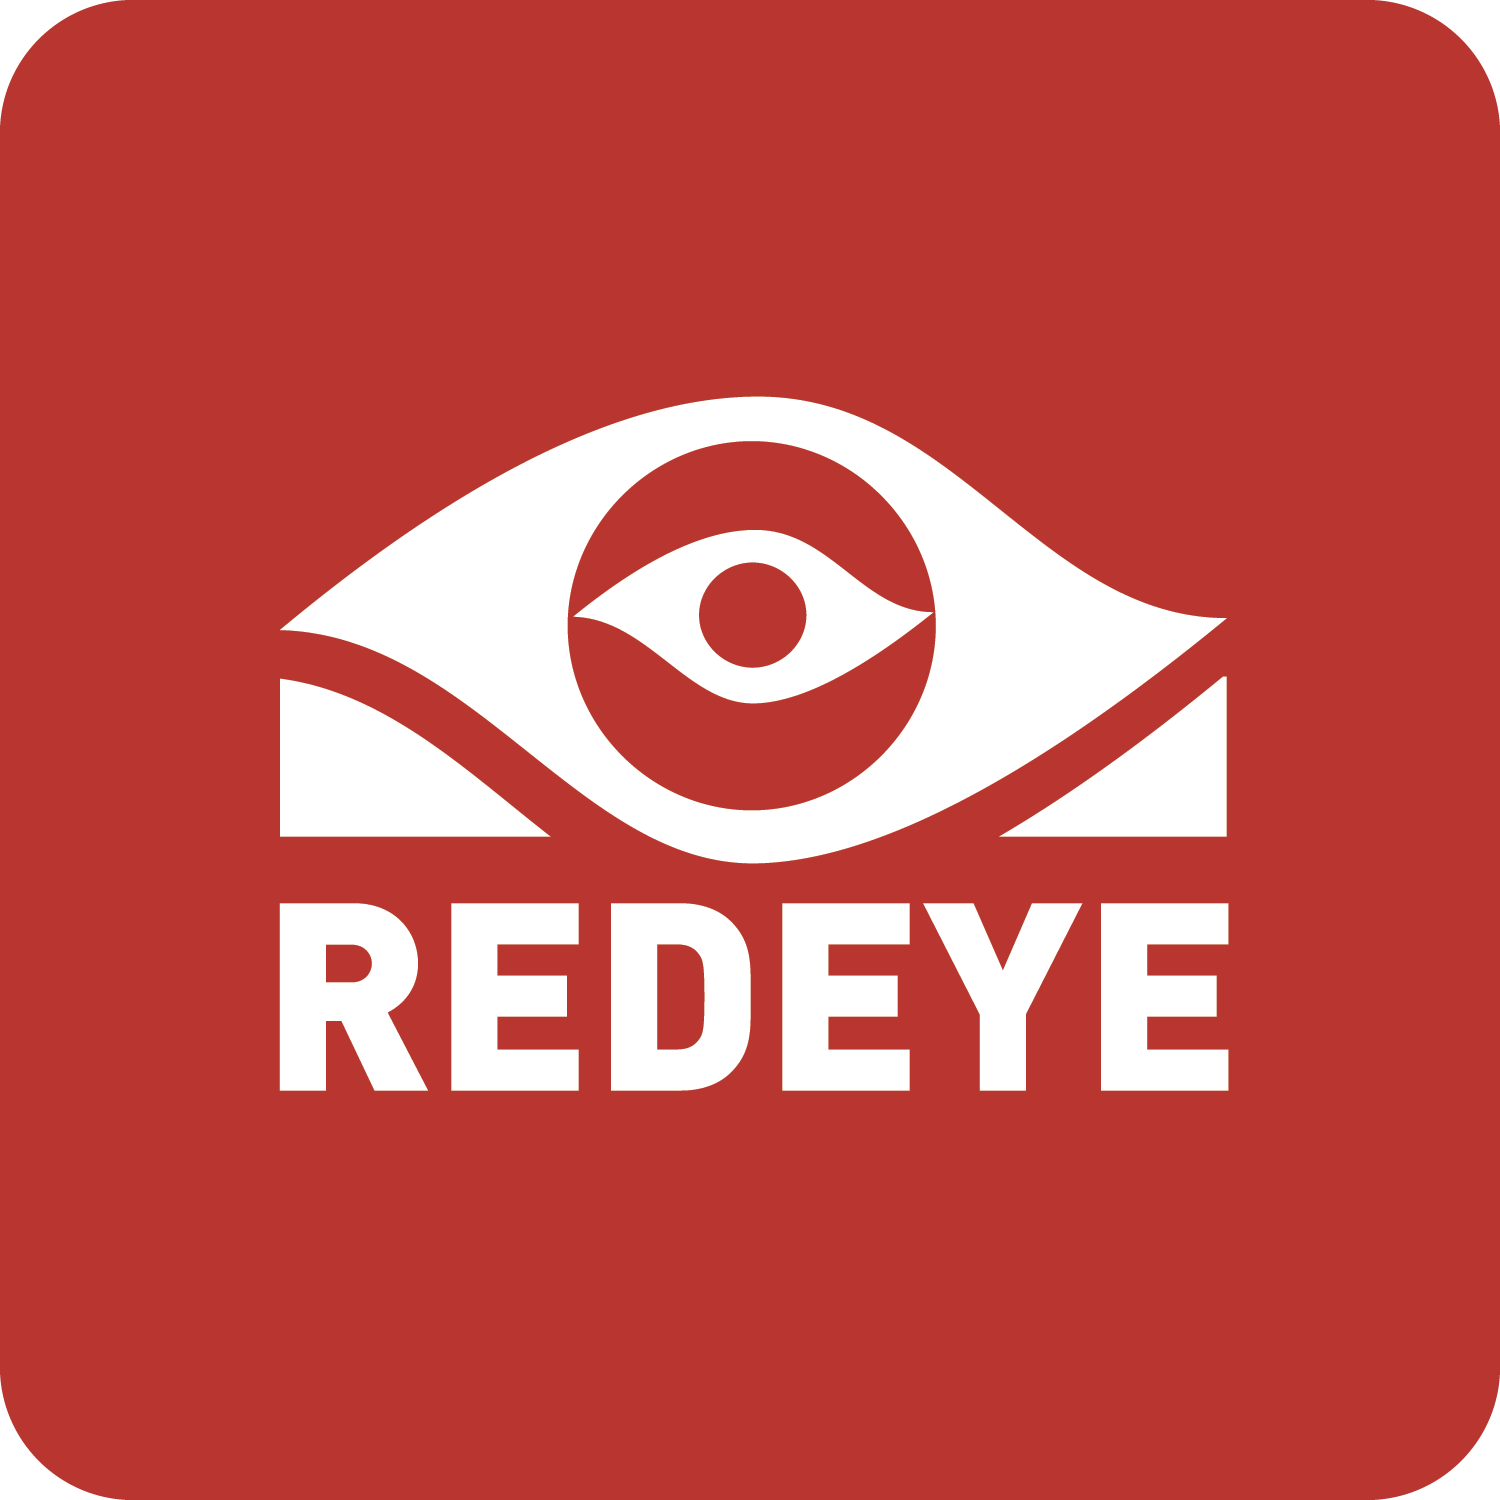 Rounded_Red_Square_RedEye_logo